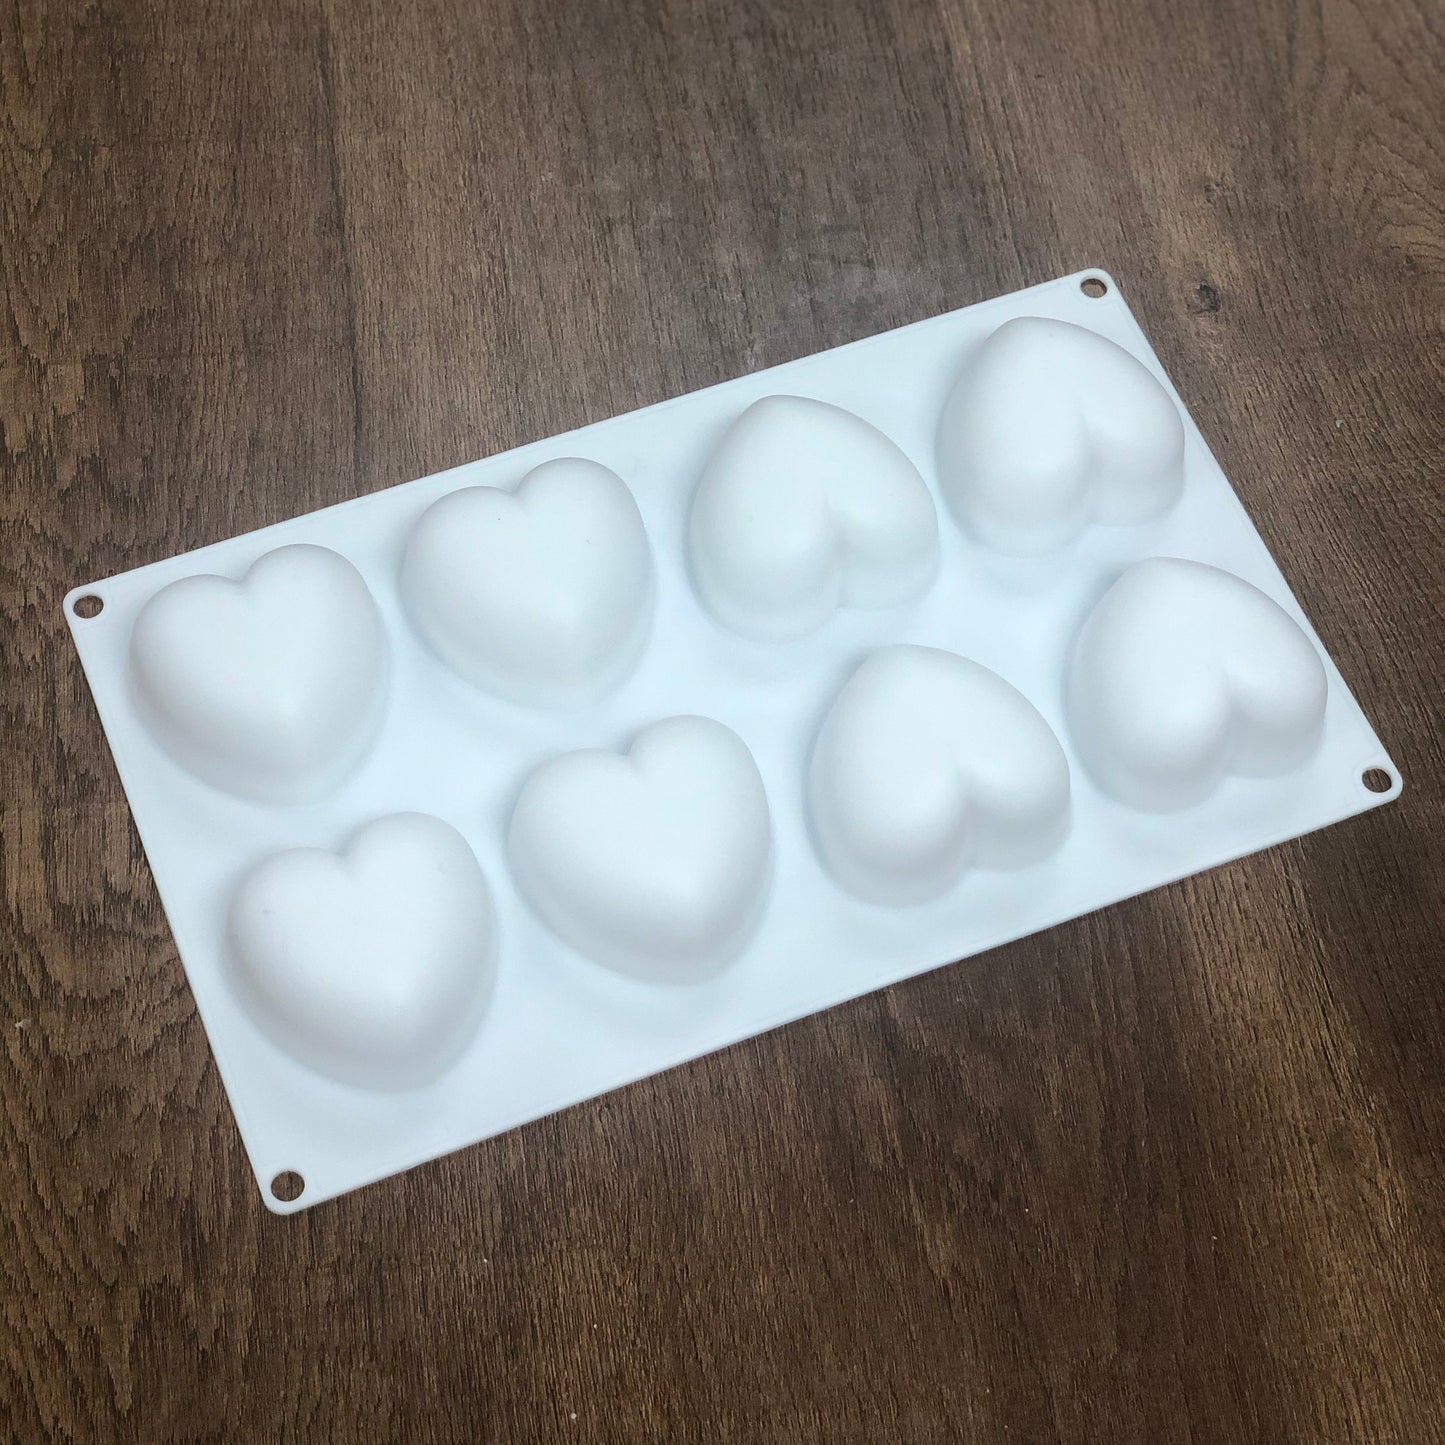 Heart Shaped Soap Making Mold 心形矽膠模 - Discover Health & Lifestyle Asia